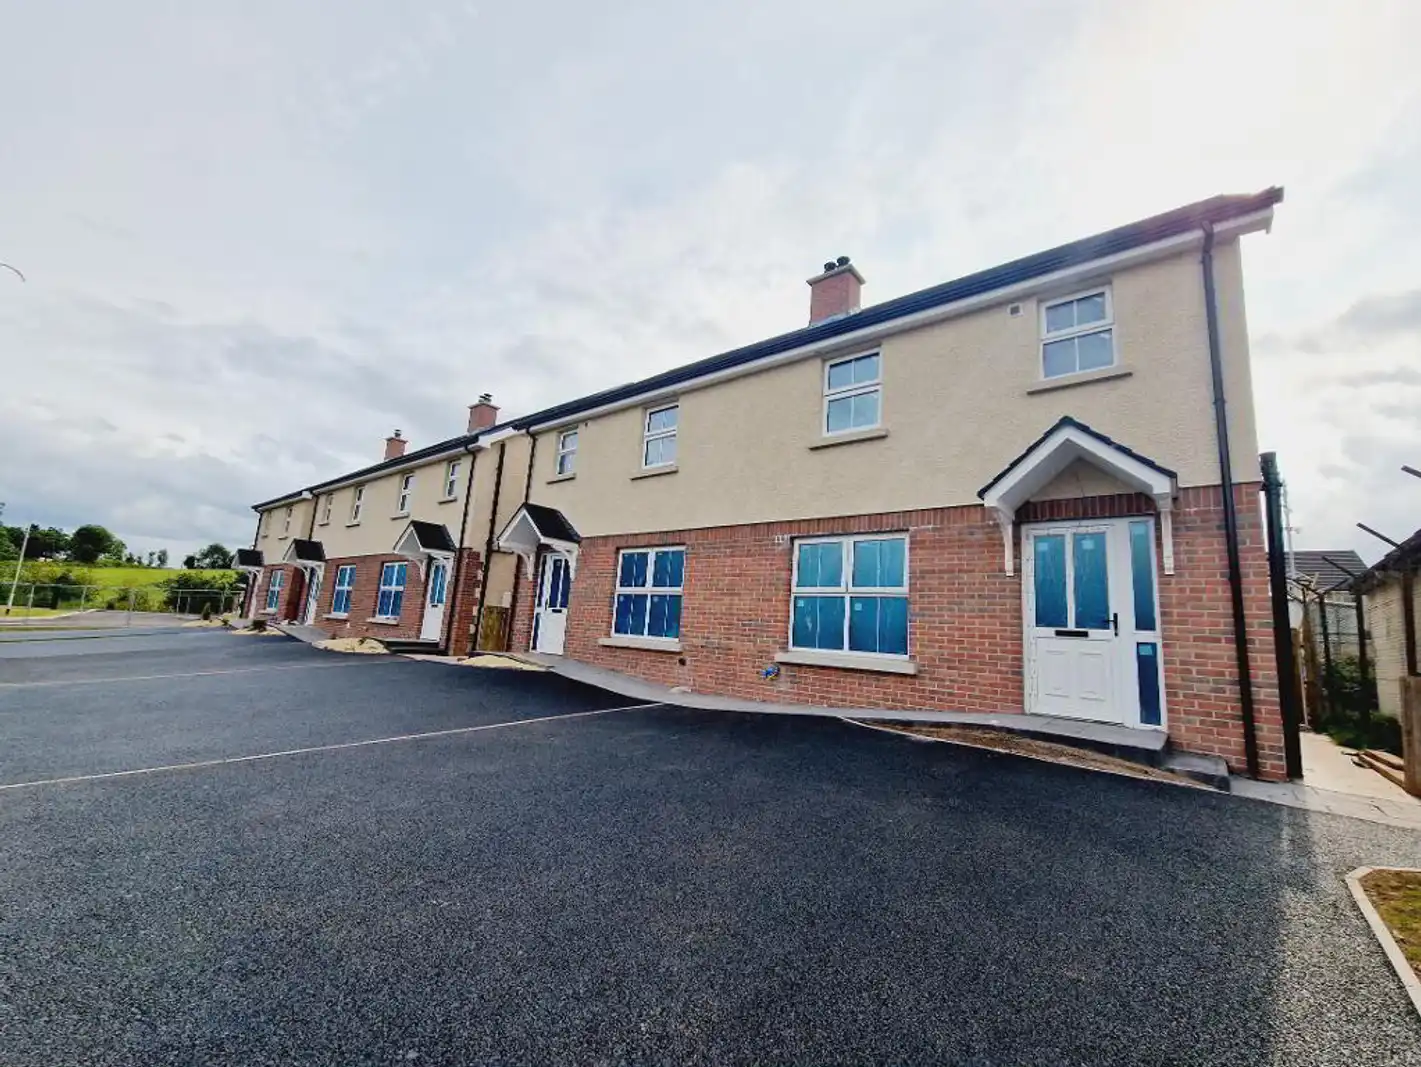 3 Bedroom Semi-Detached, 39 Hutton Drive, Beragh, Omagh, Tyrone